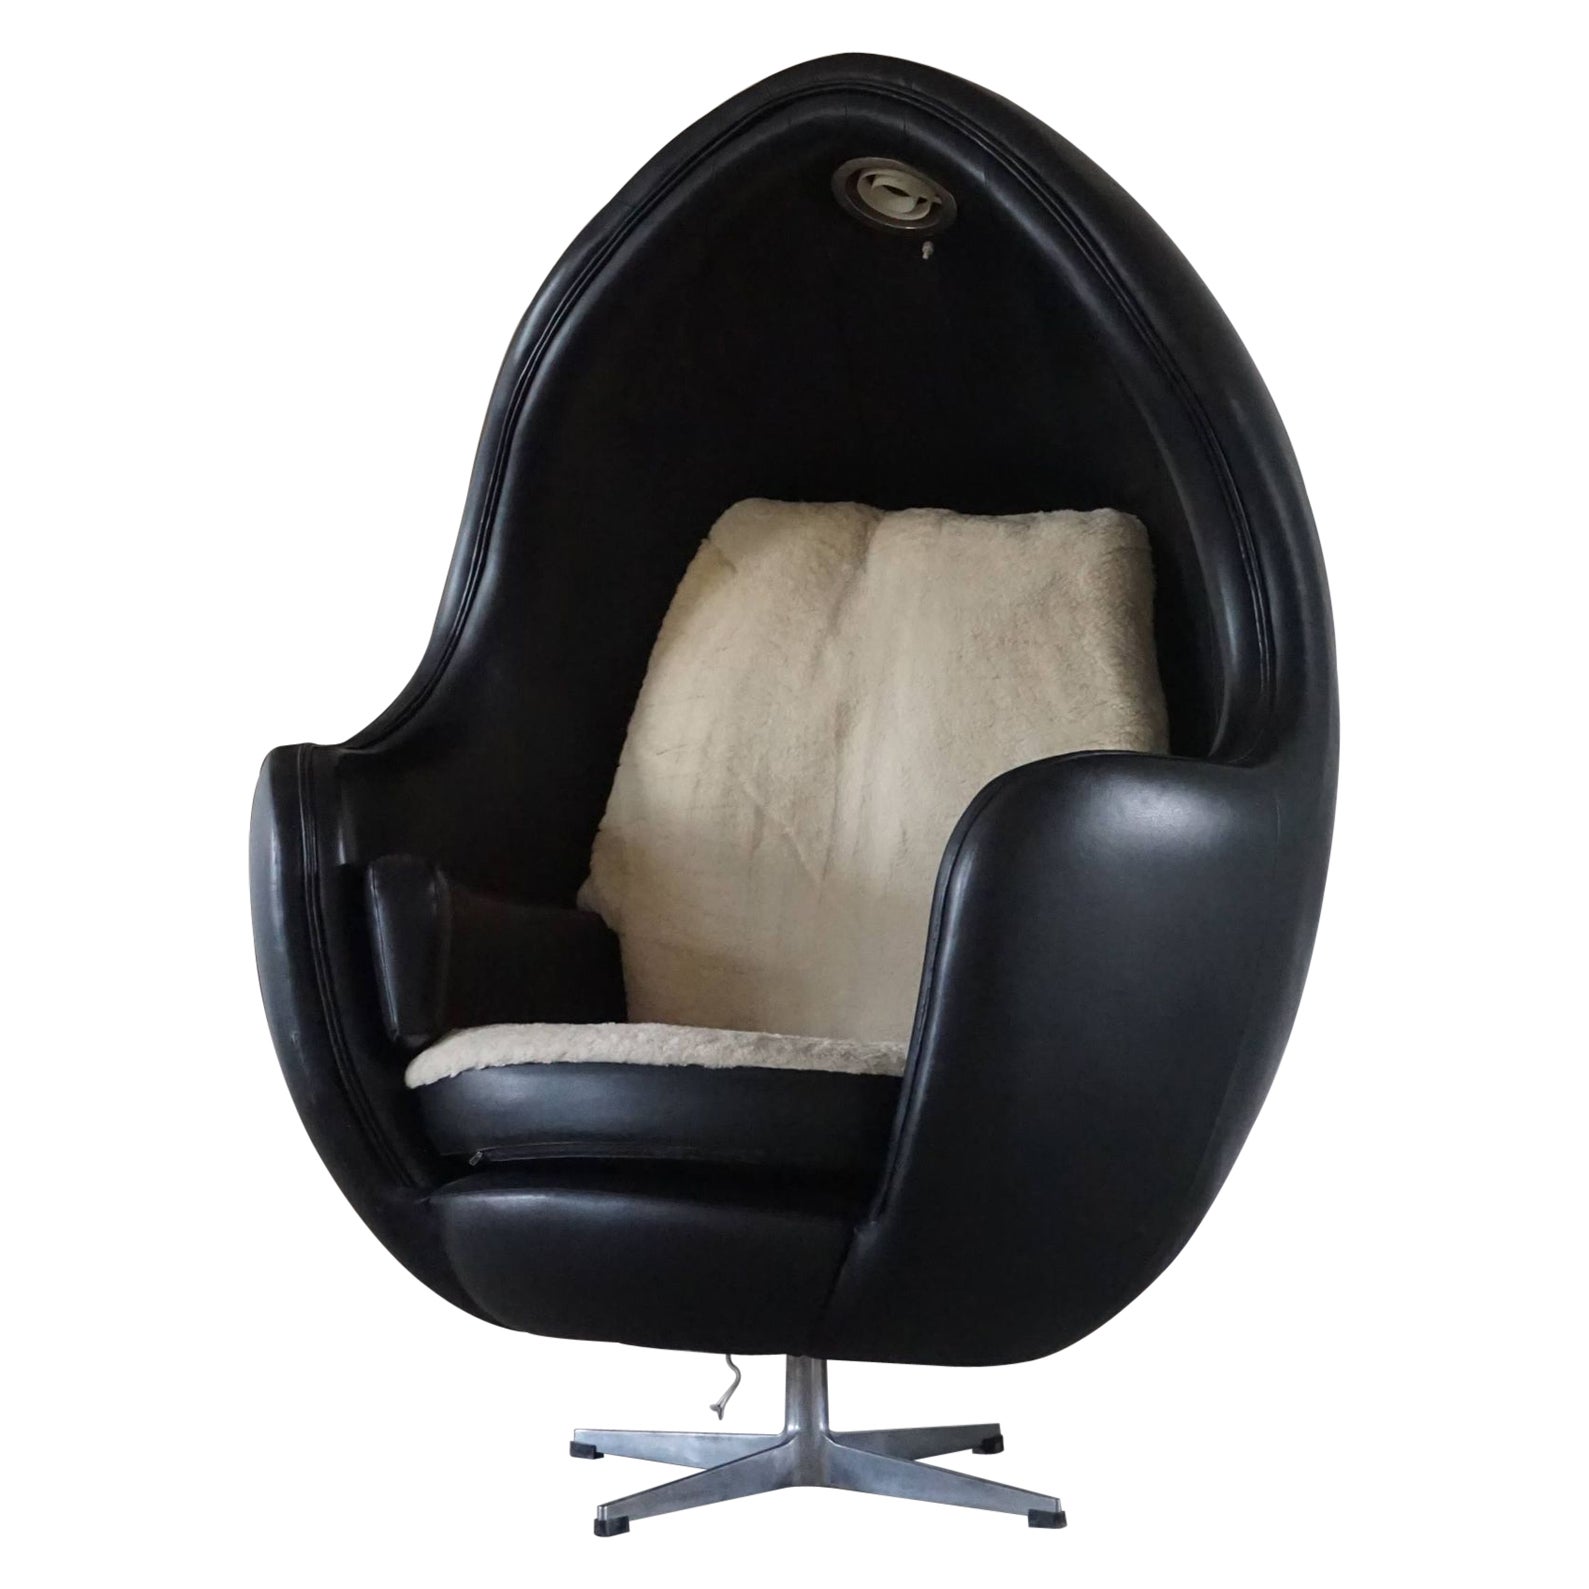 Funky European Space Chair in Leather and Lambwool, Shaped like an Egg, 1980s